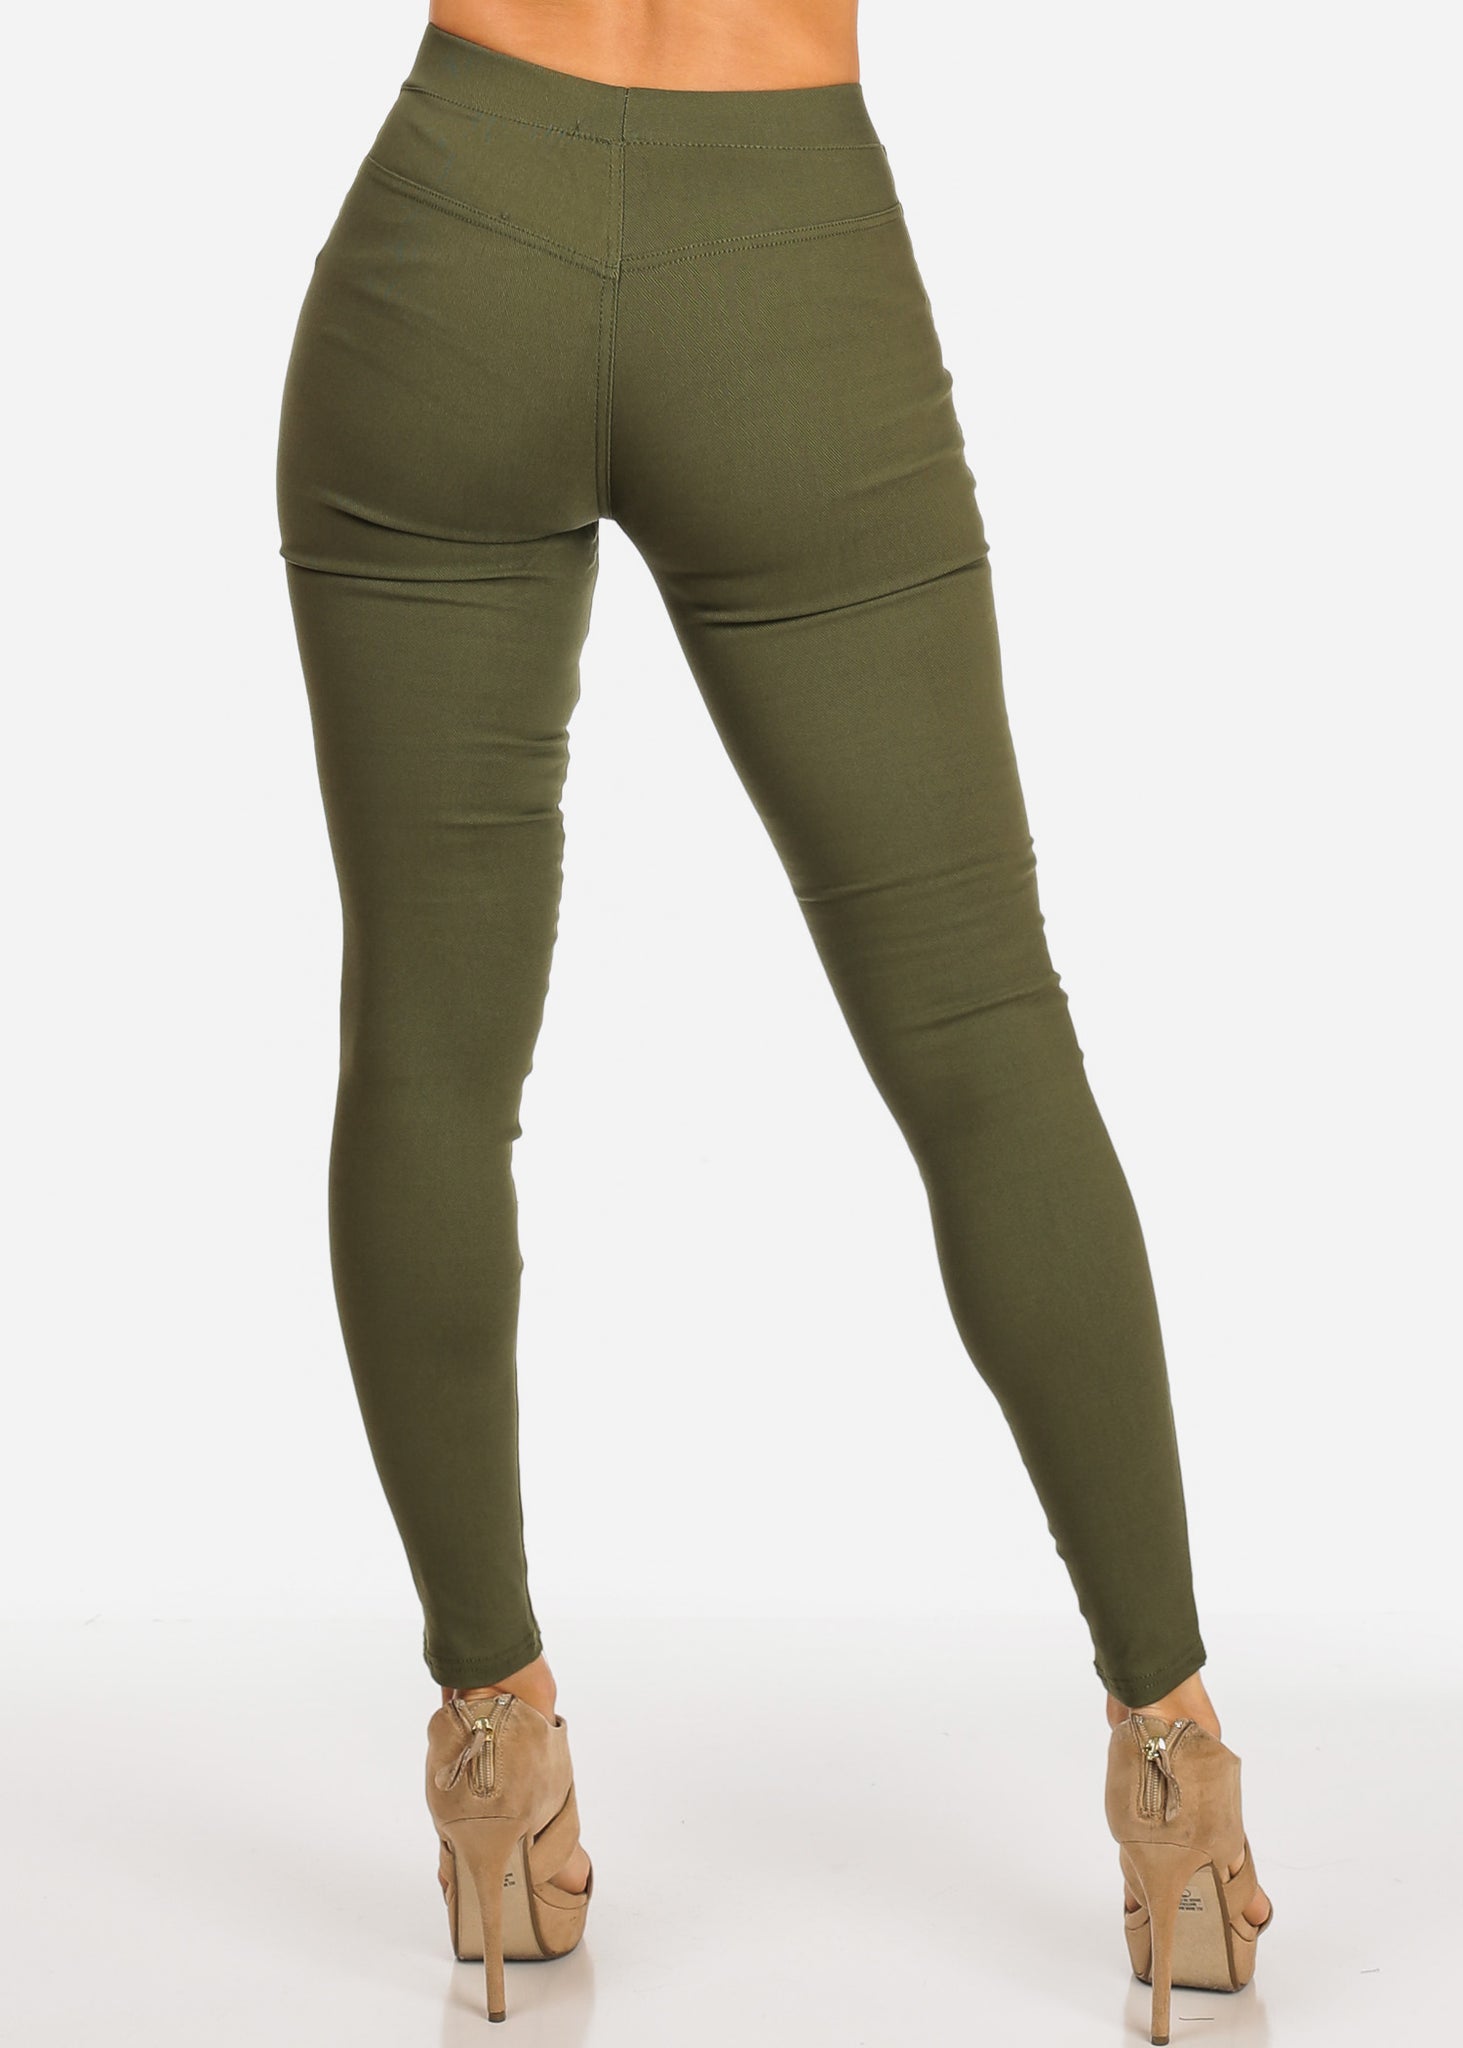 NEW Cotton Stretch Full Length Moto Leggings Wide Waistband- Olive